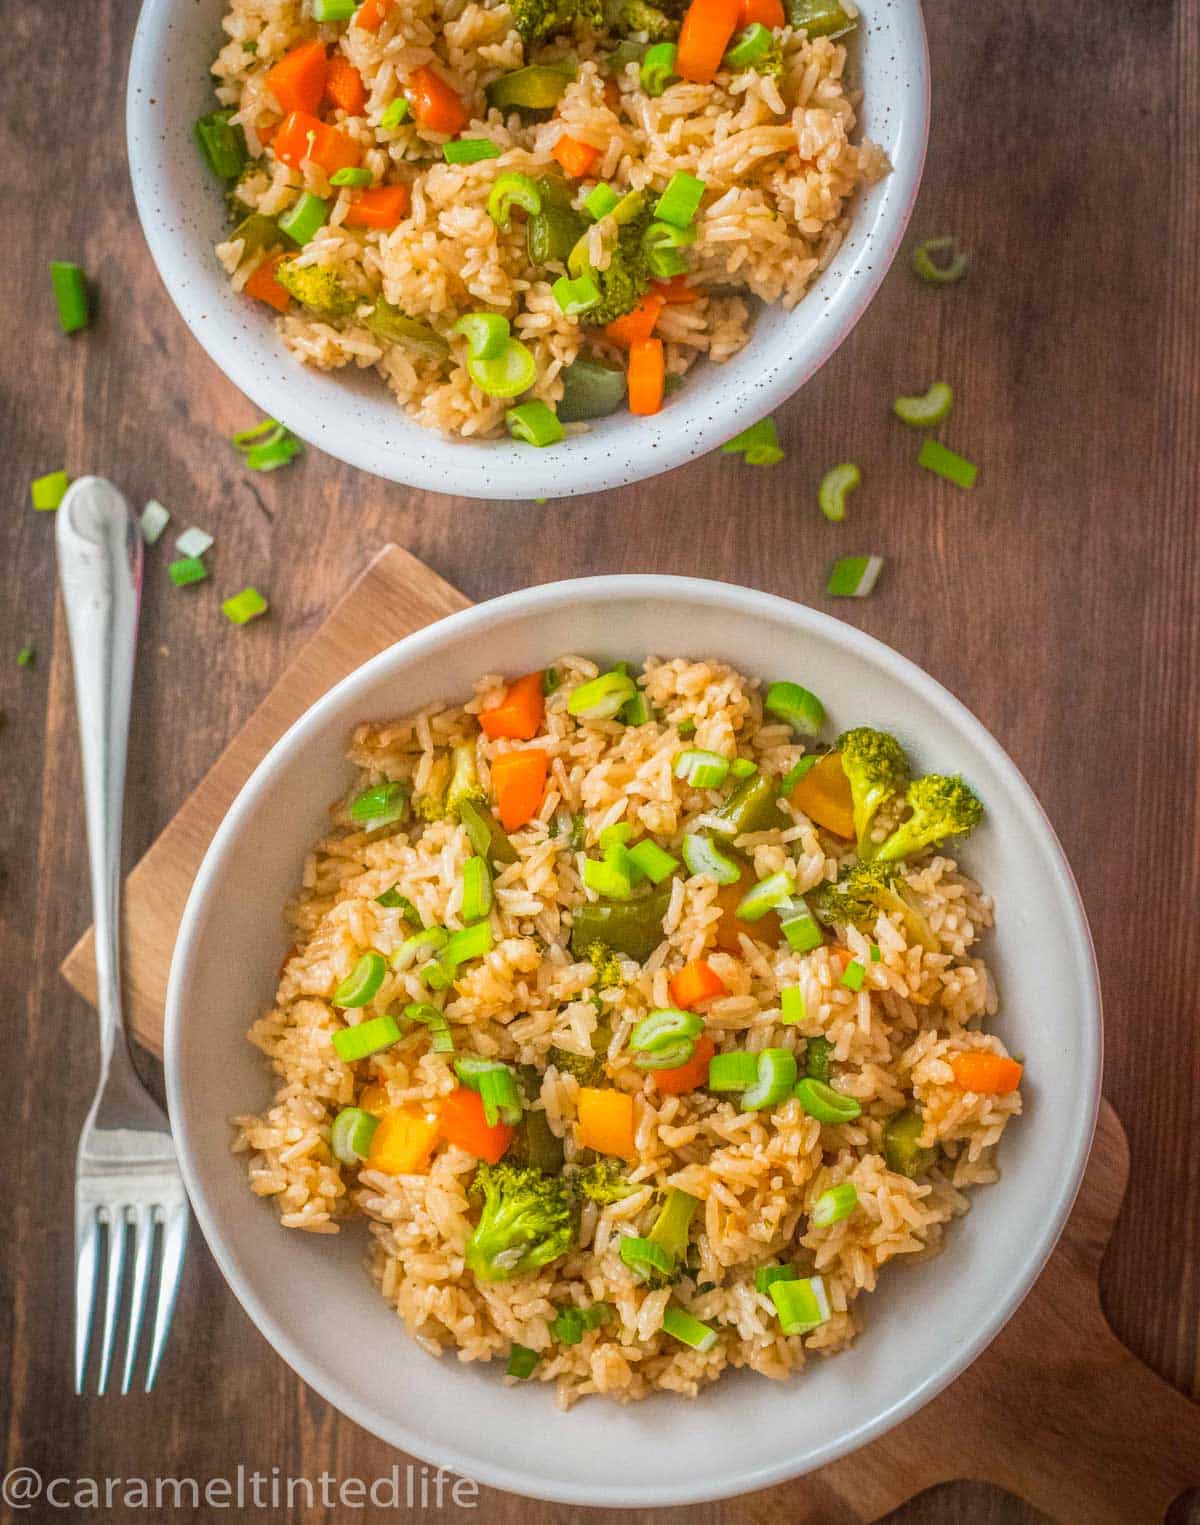 Two bowls of fried rice and a fork on a wooden backdrop